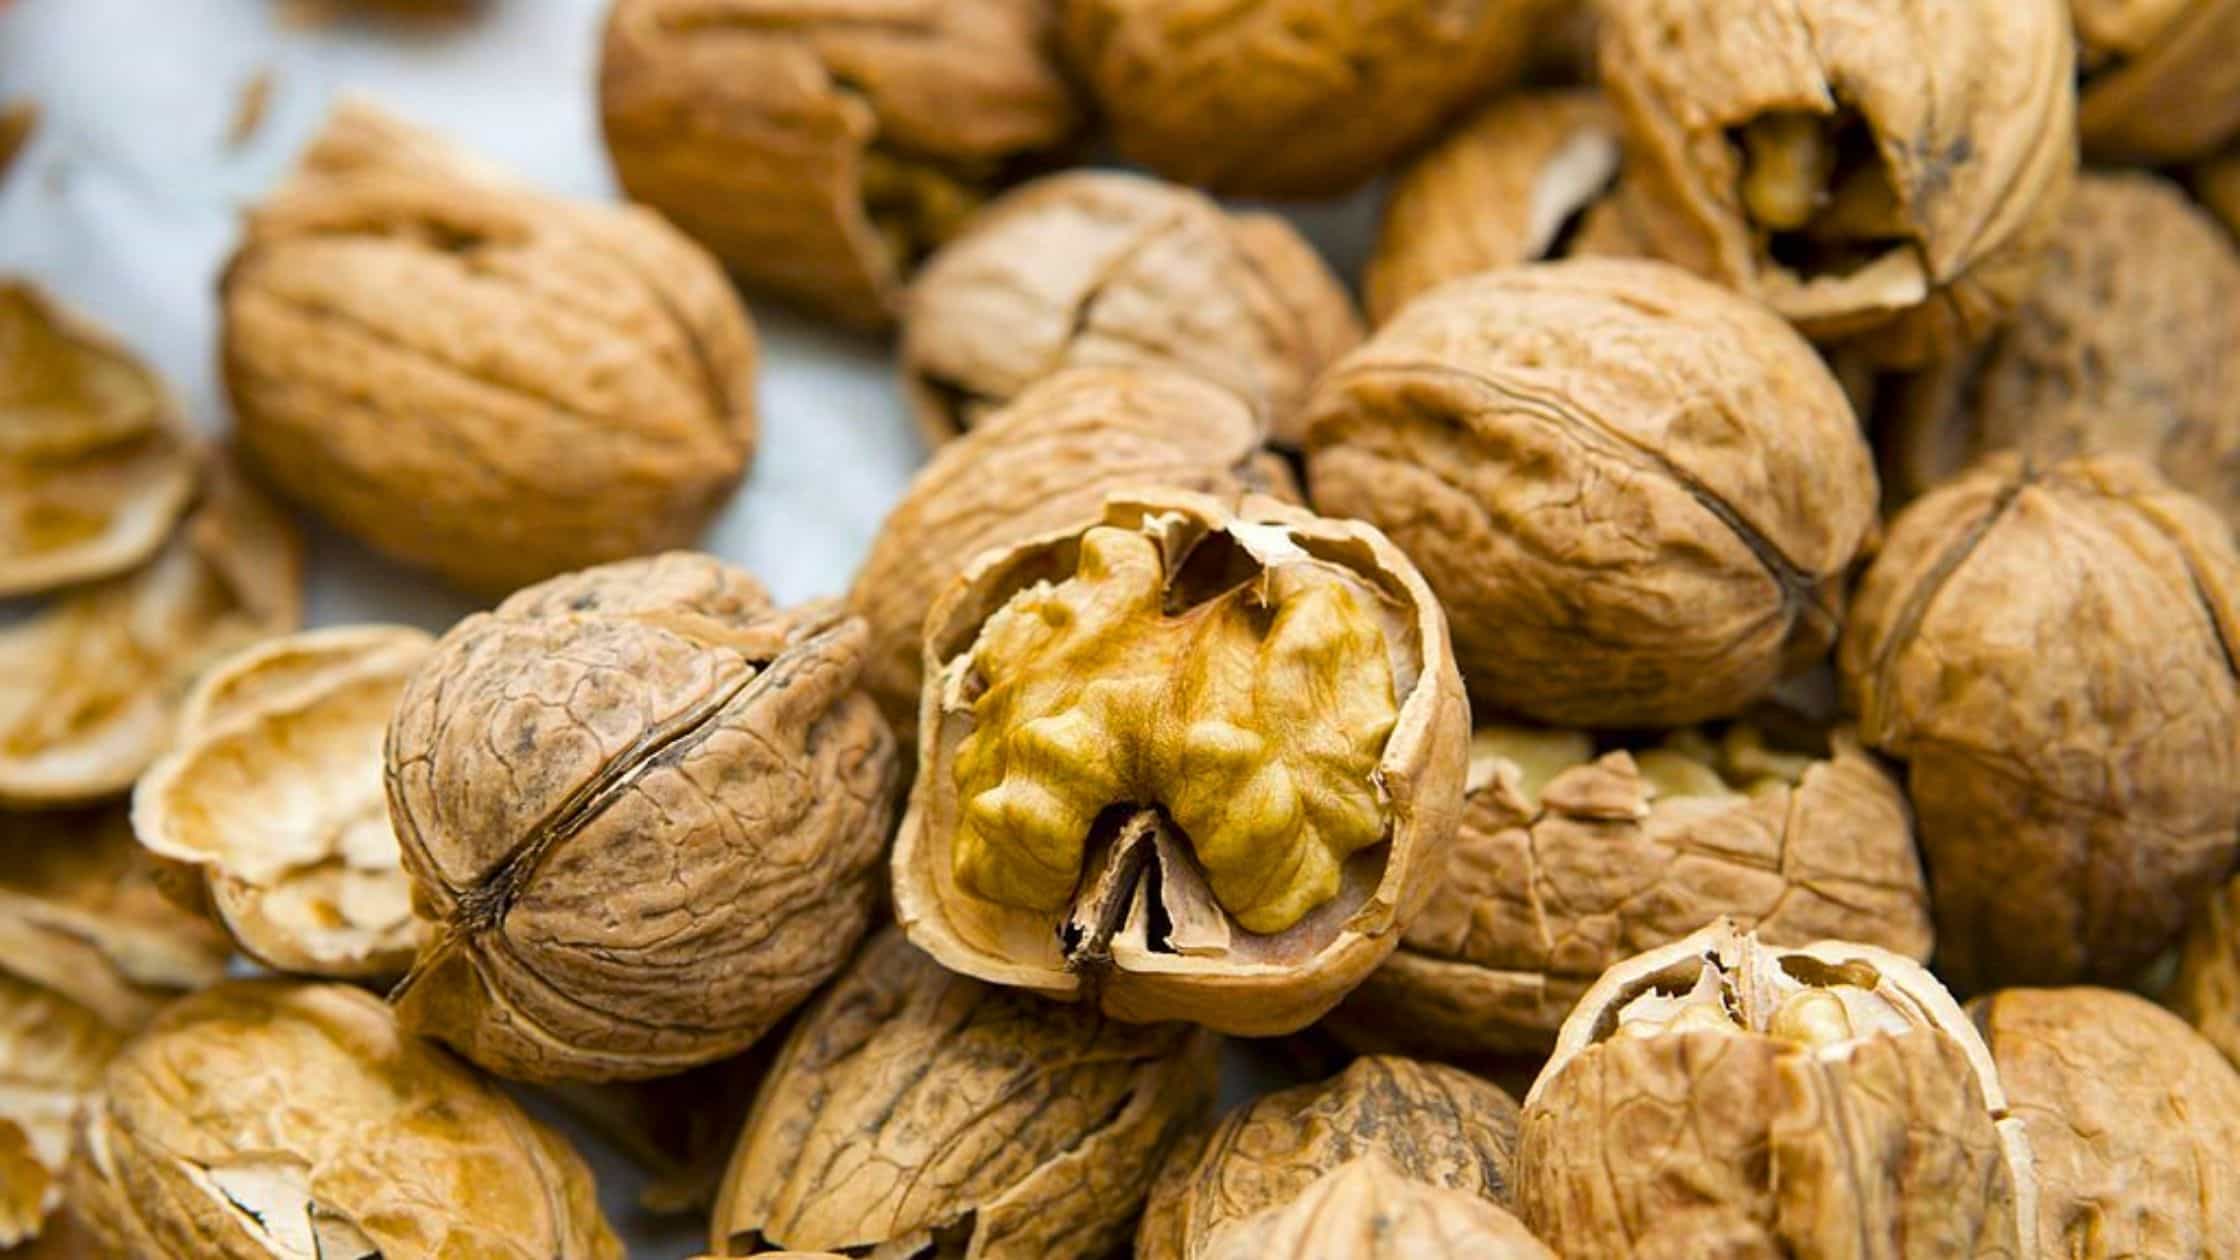 Heart Health Benefits Of Walnut And Microbes In The Gut